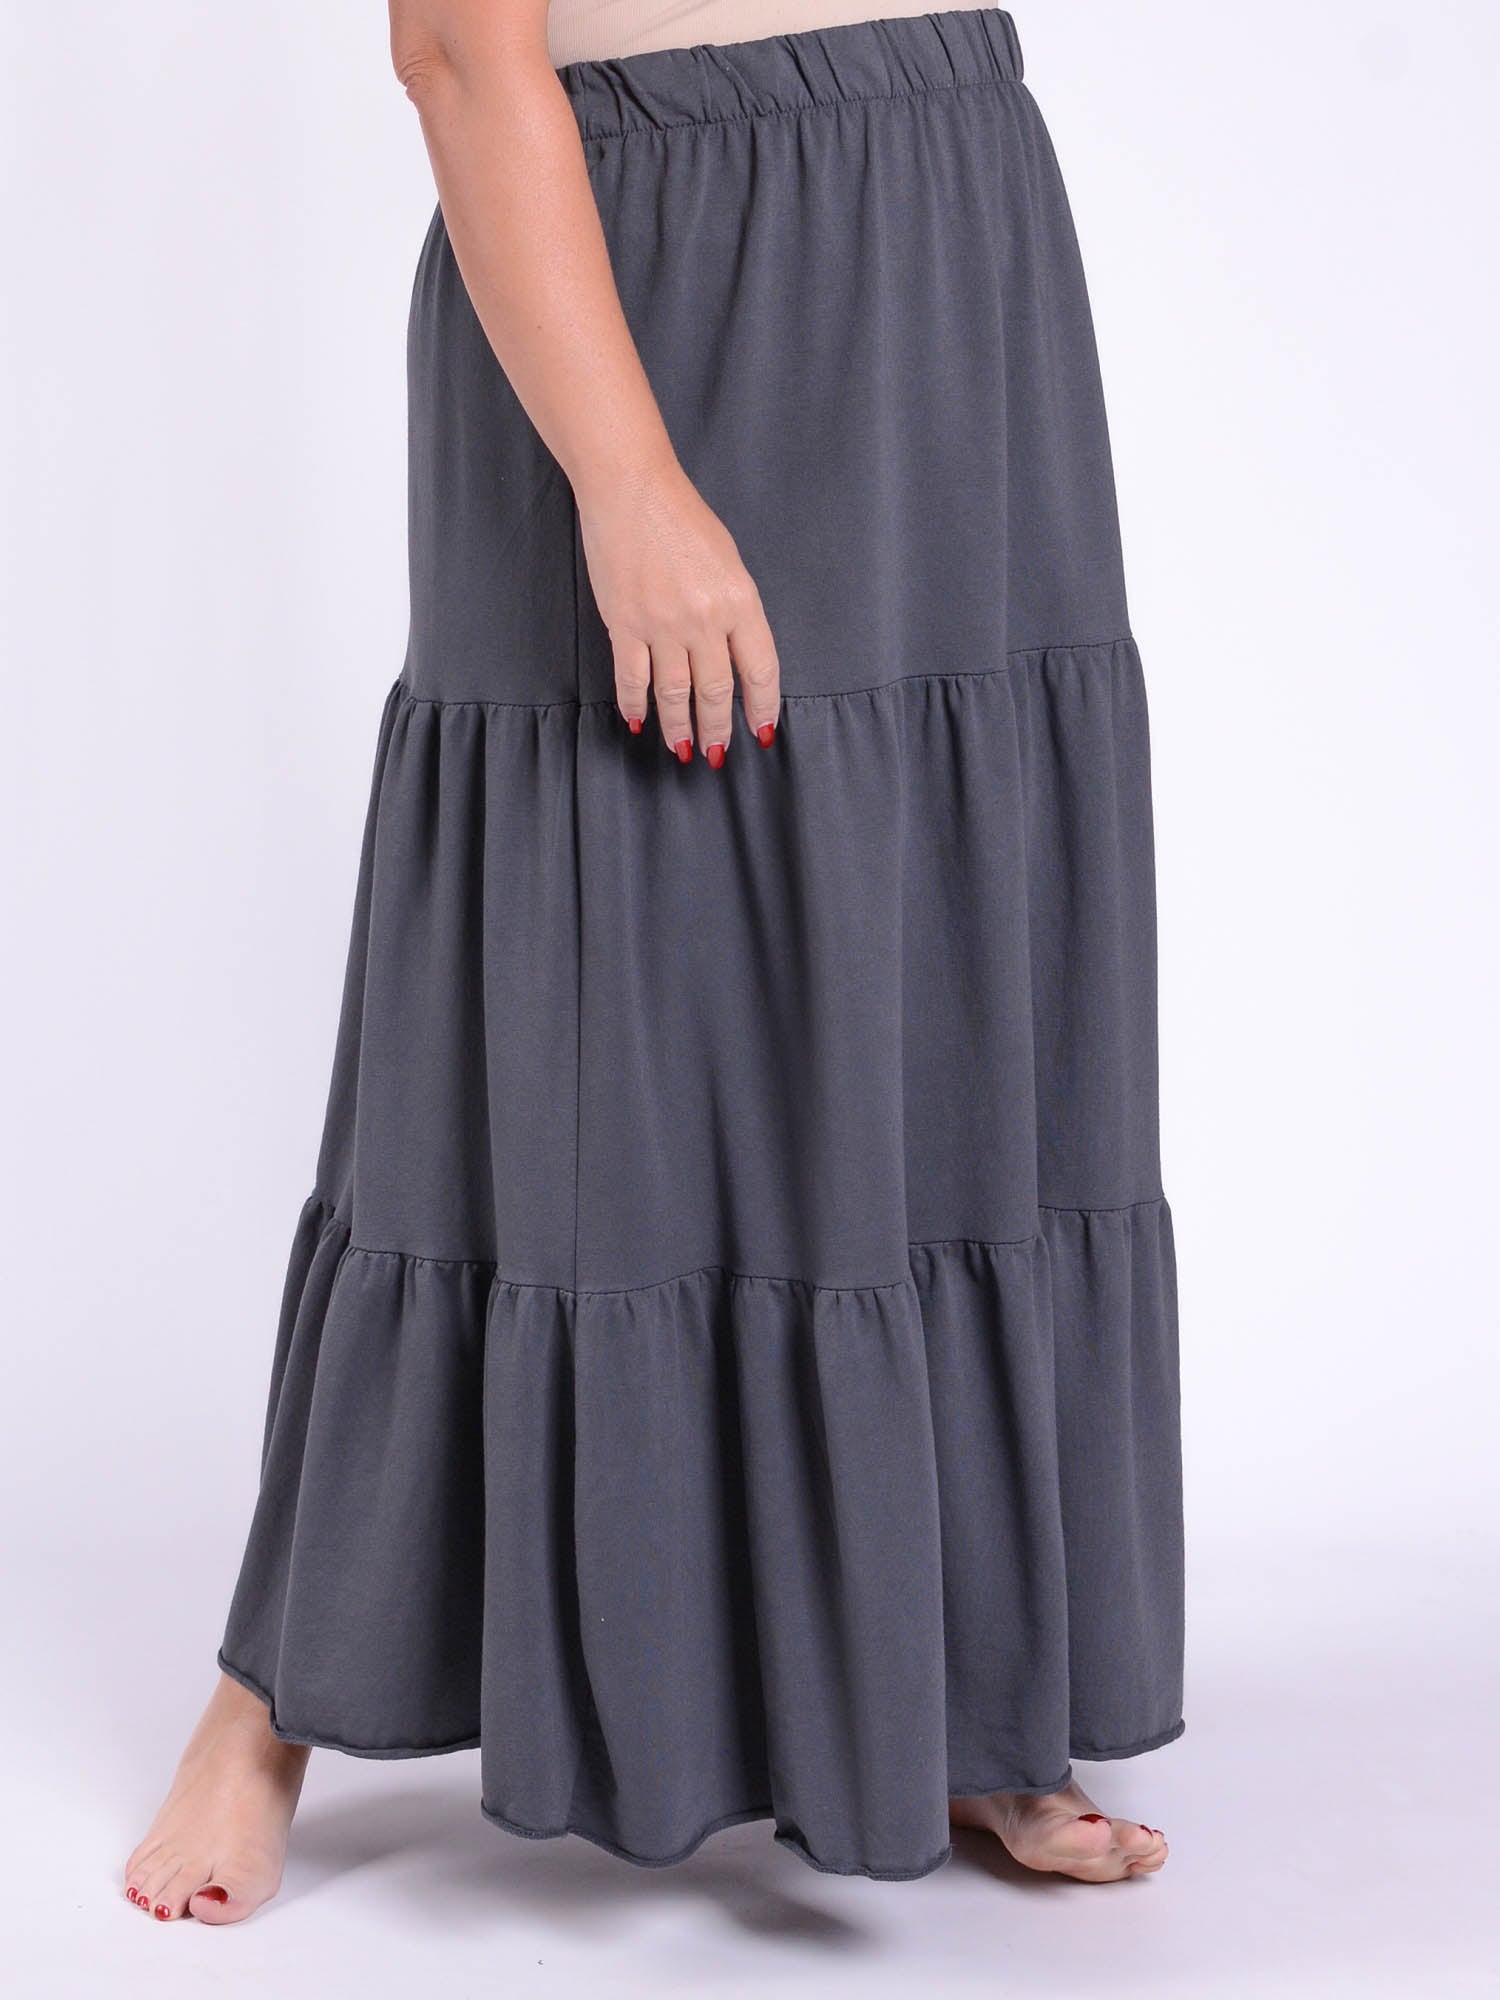 Lagenlook Tiered Cotton Maxi Skirt - 10963, Skirts, Pure Plus Clothing, Lagenlook Clothing, Plus Size Fashion, Over 50 Fashion